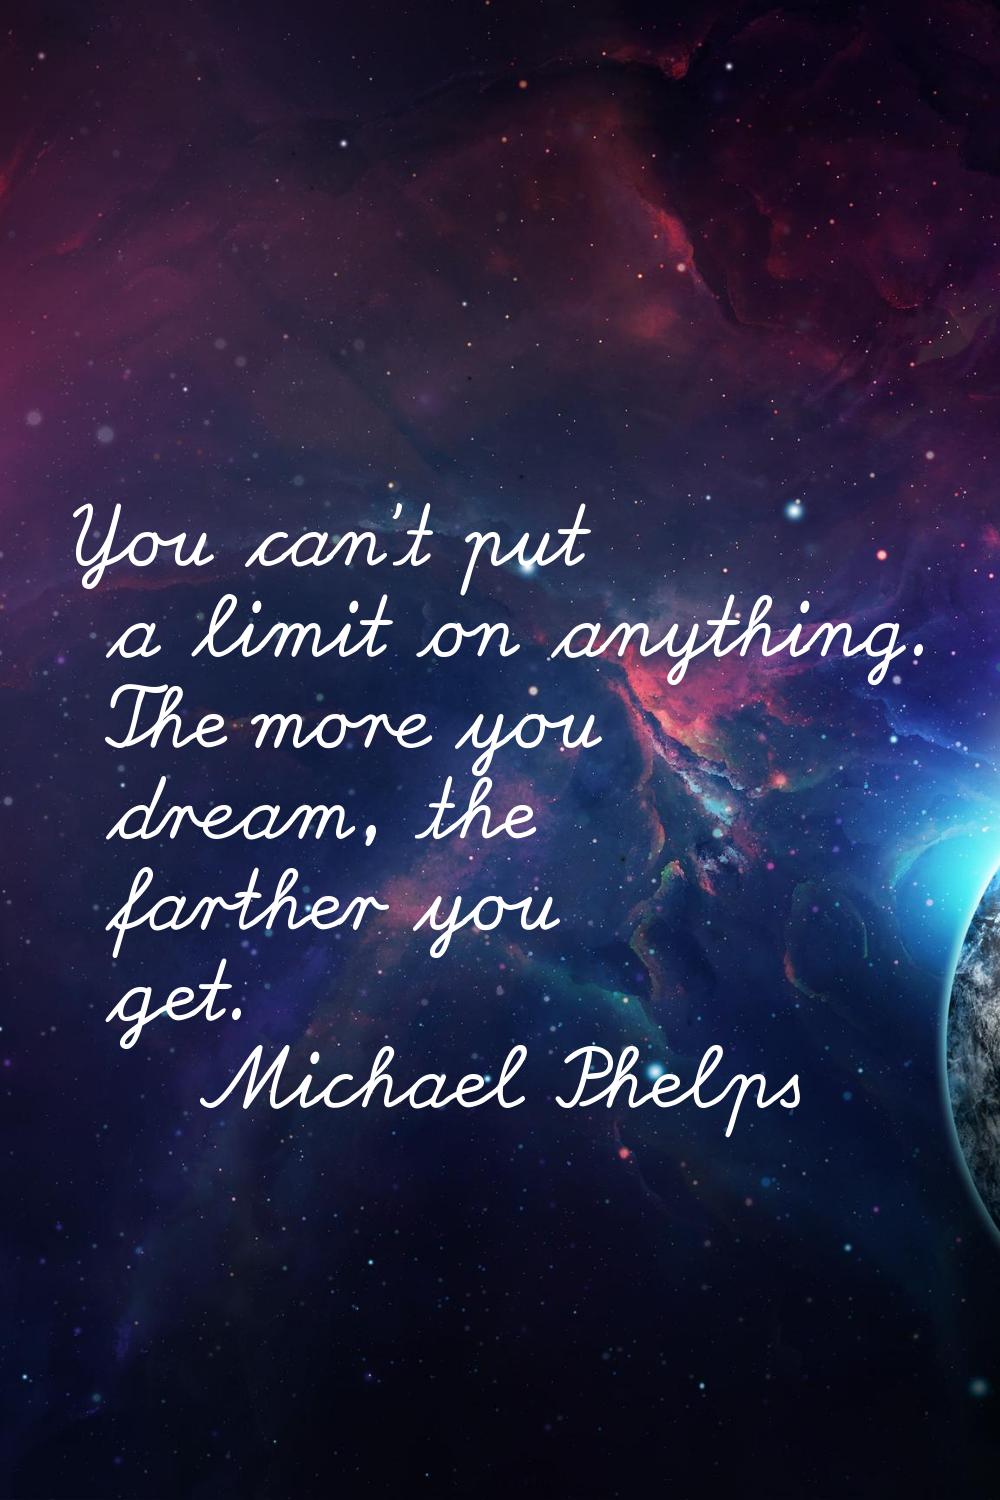 You can't put a limit on anything. The more you dream, the farther you get.